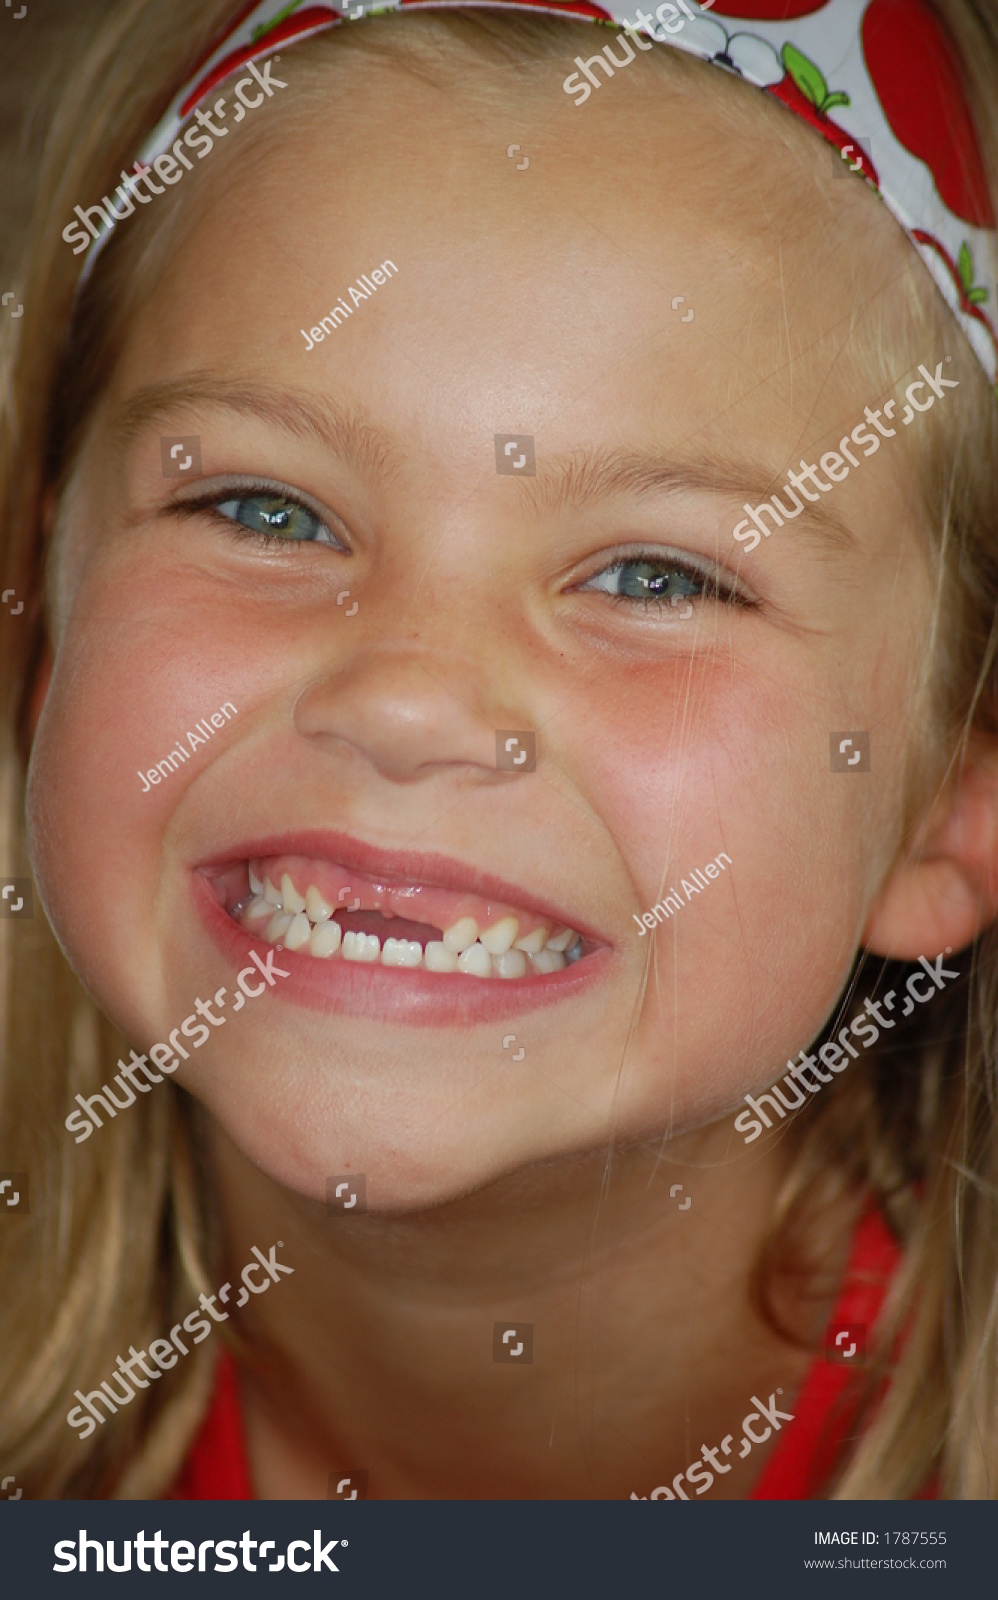 Two front teeth missing